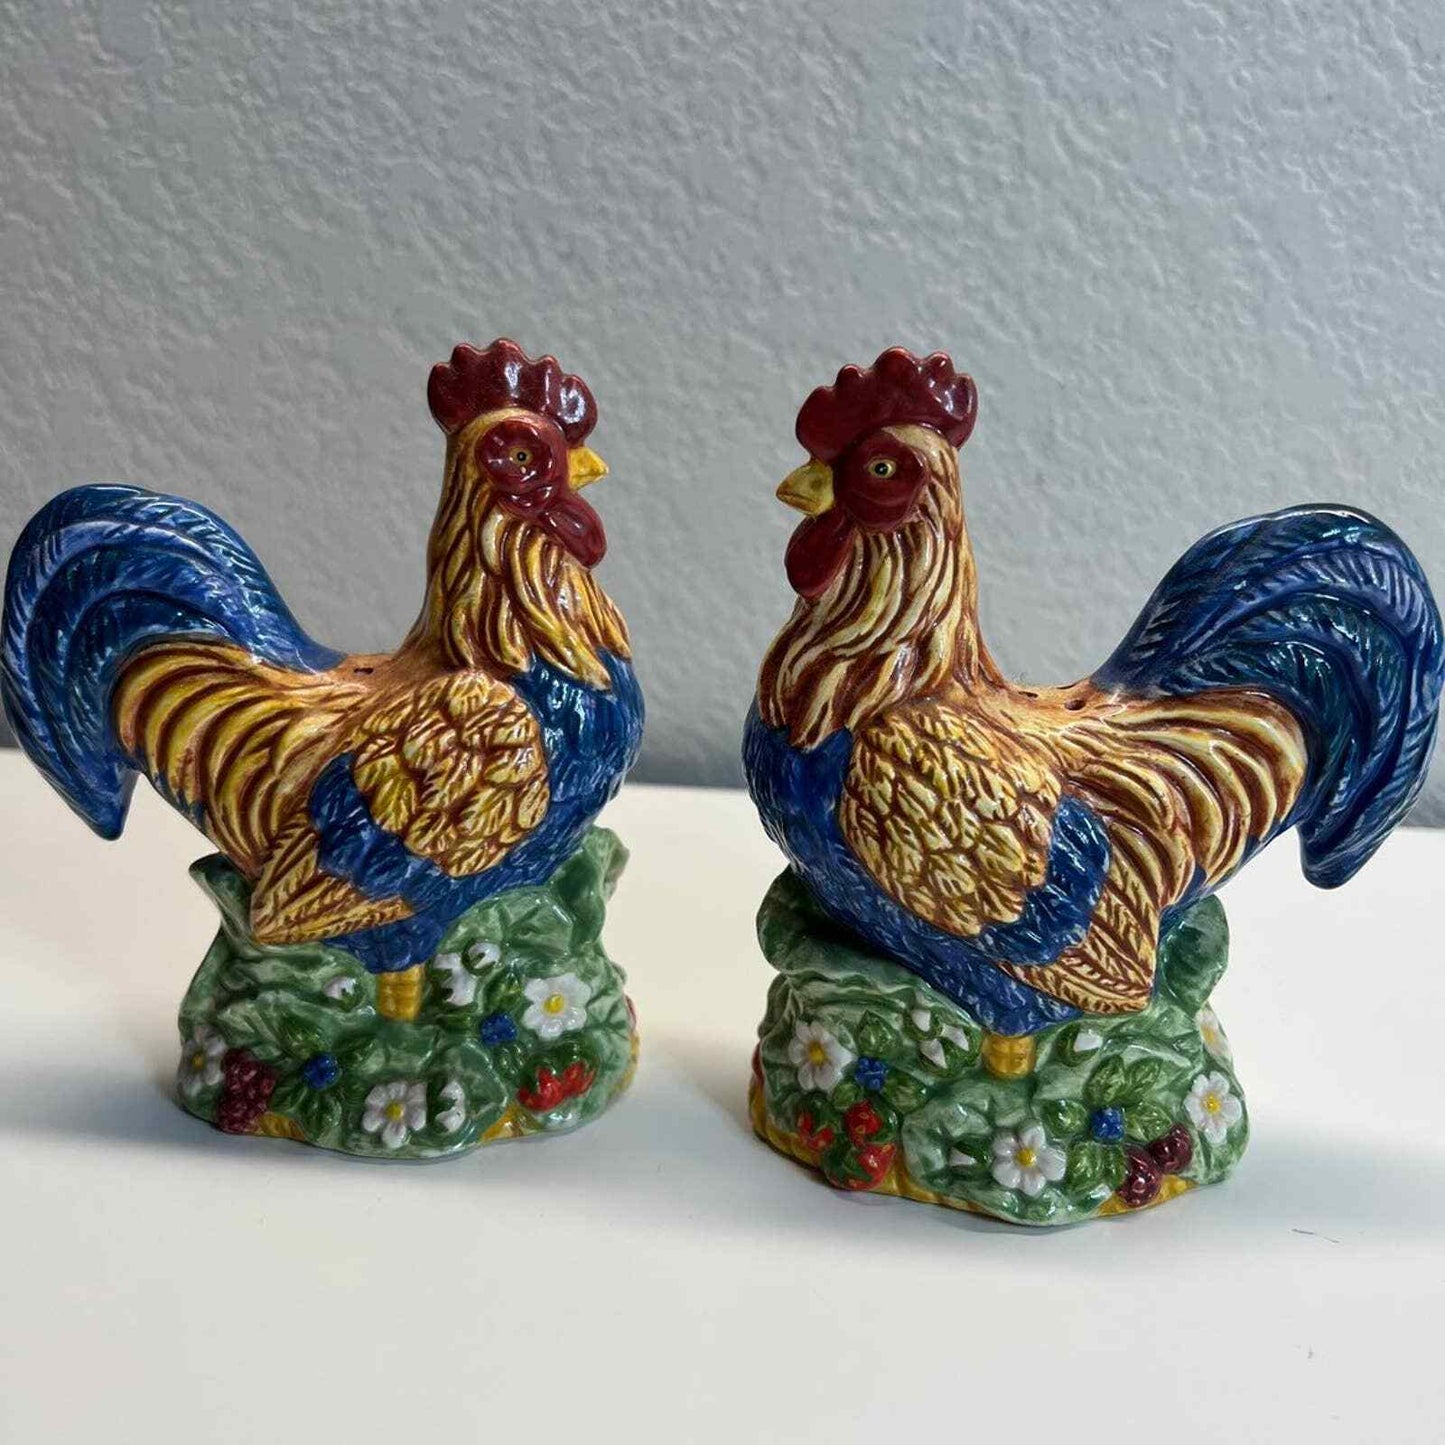 Burton and Burton Roosters Salt And Pepper Shakers 4.5" Hand Painted Ceramic